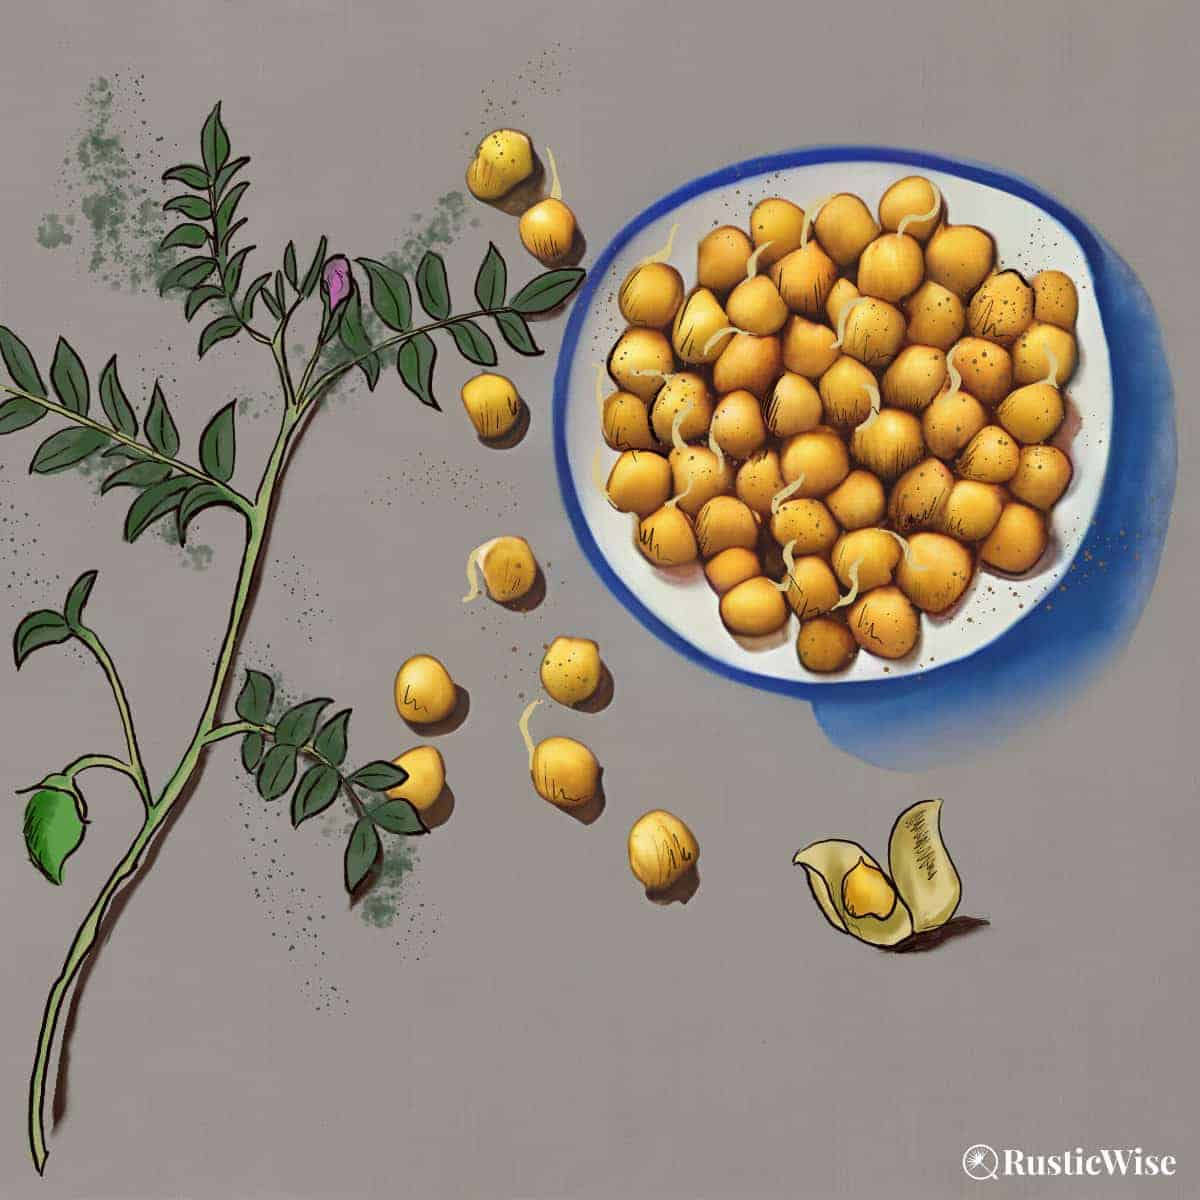 RusticWise, grow chickpea sprouts